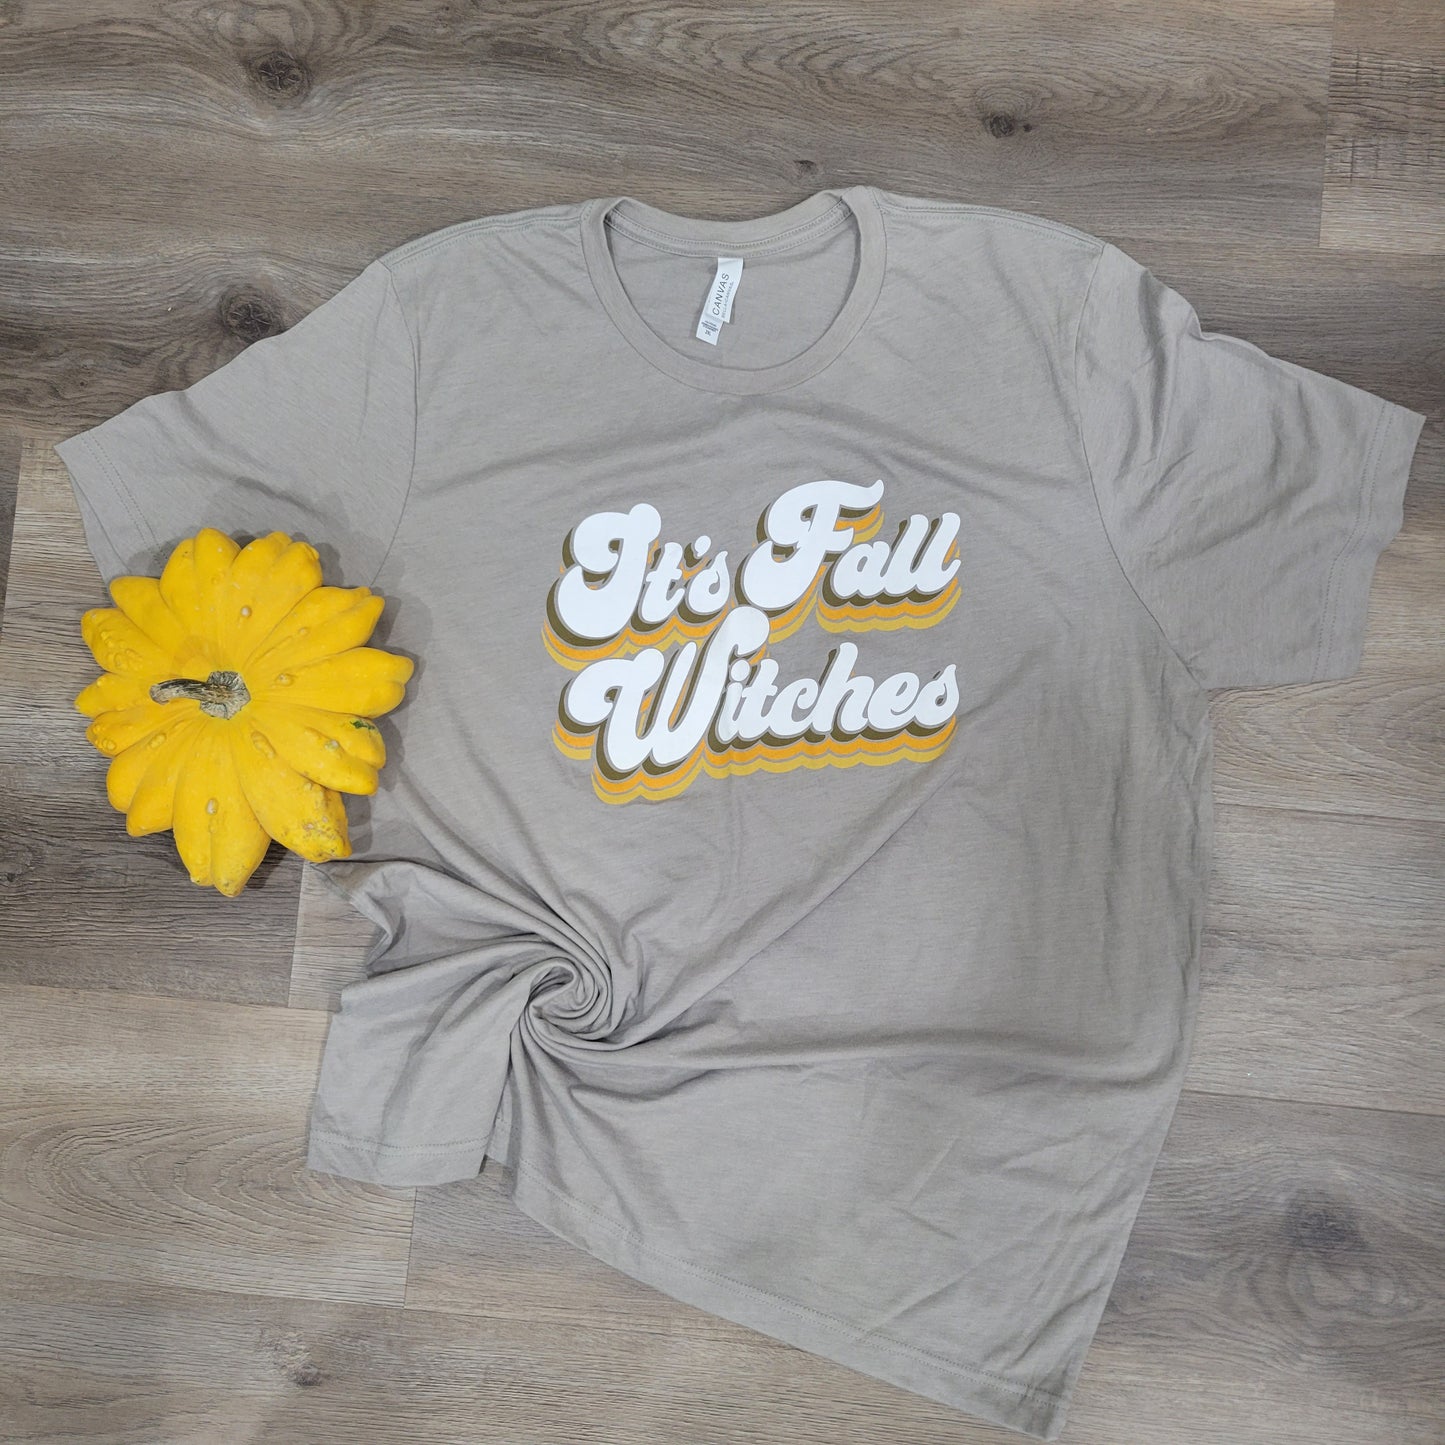 IT'S FALL WITCHES T-SHIRT